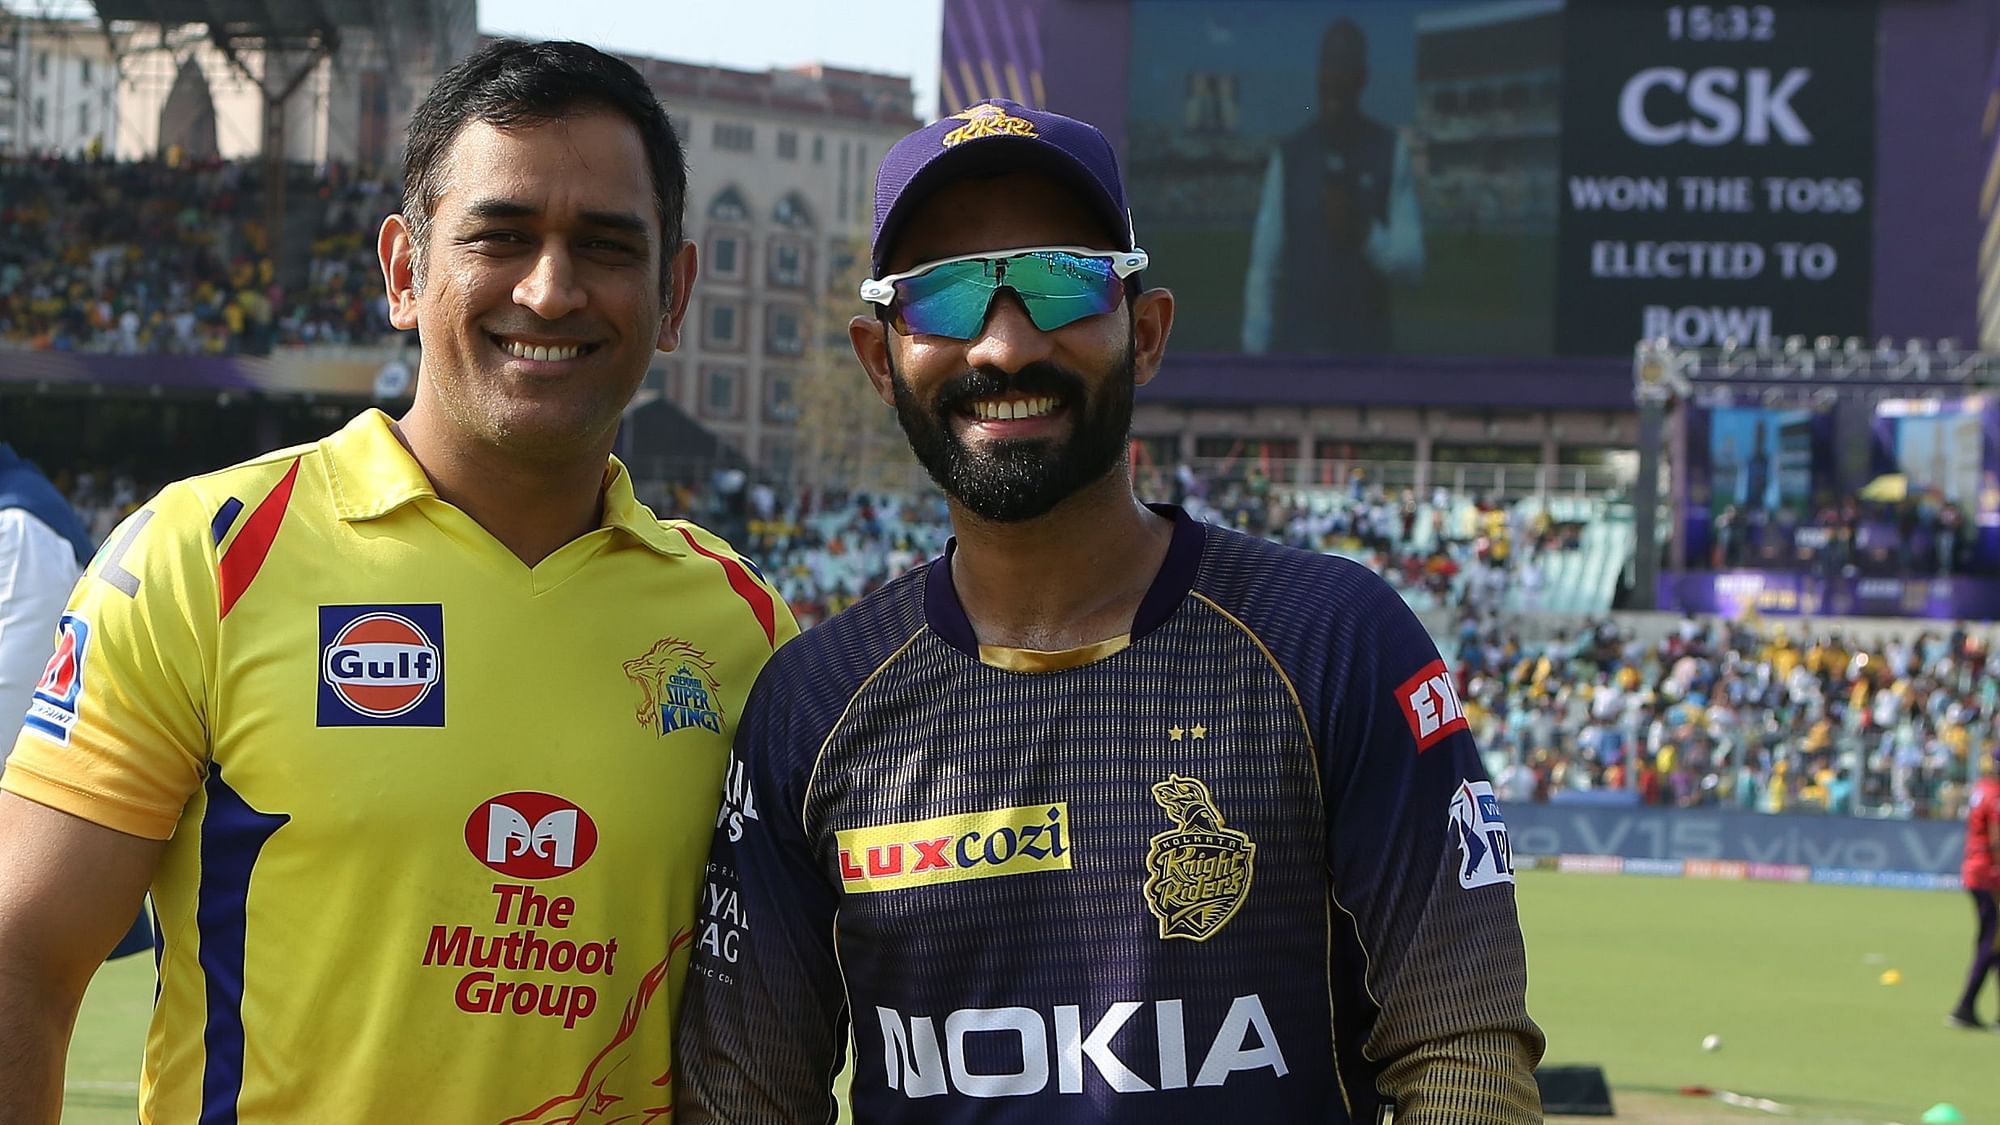 CSK will face KKR on 7th October in the IPL 2020.